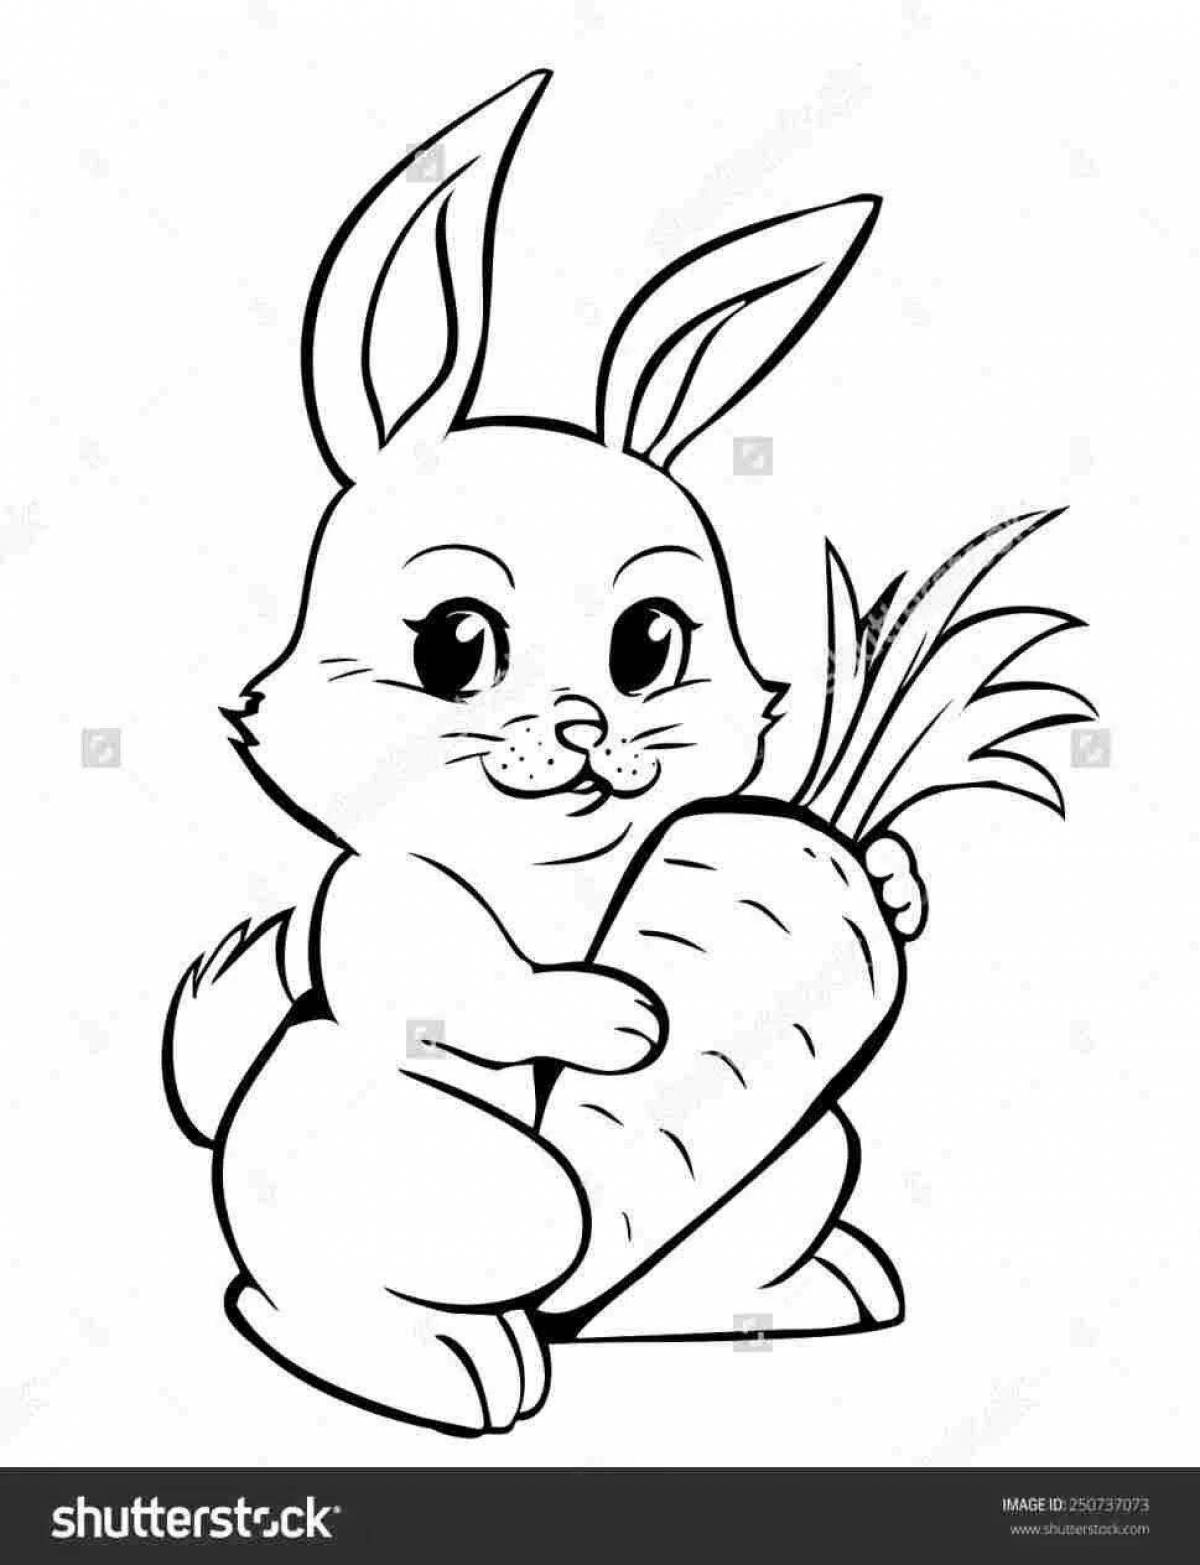 Coloring page happy rabbit with a carrot